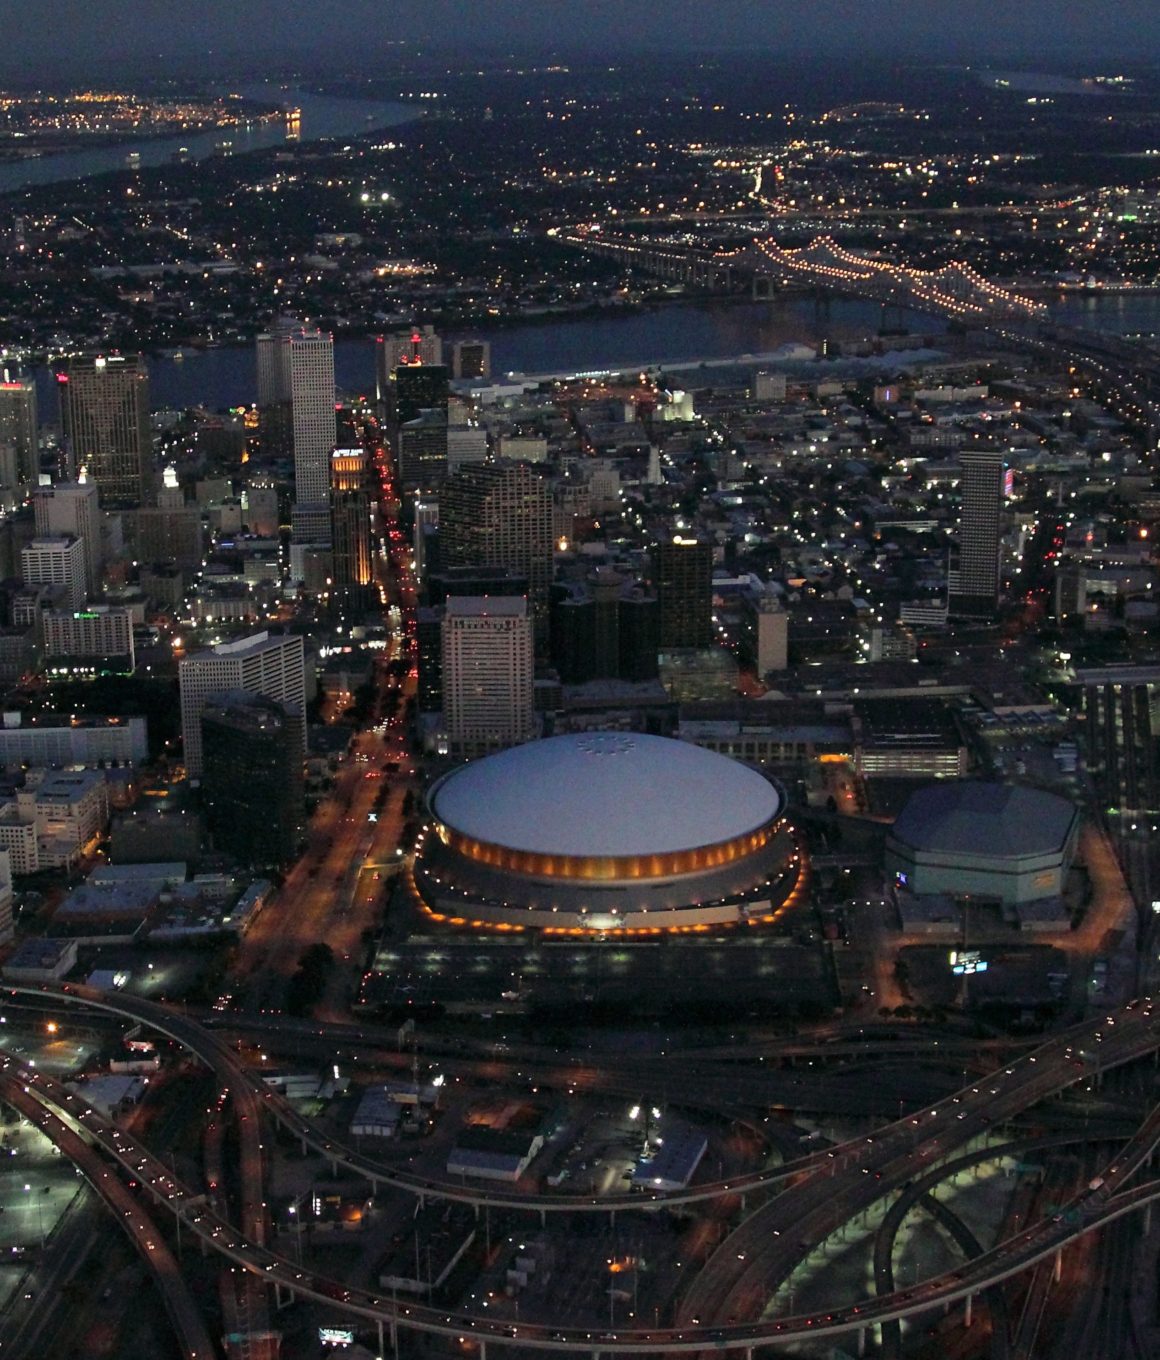 Skyline view of the superdome